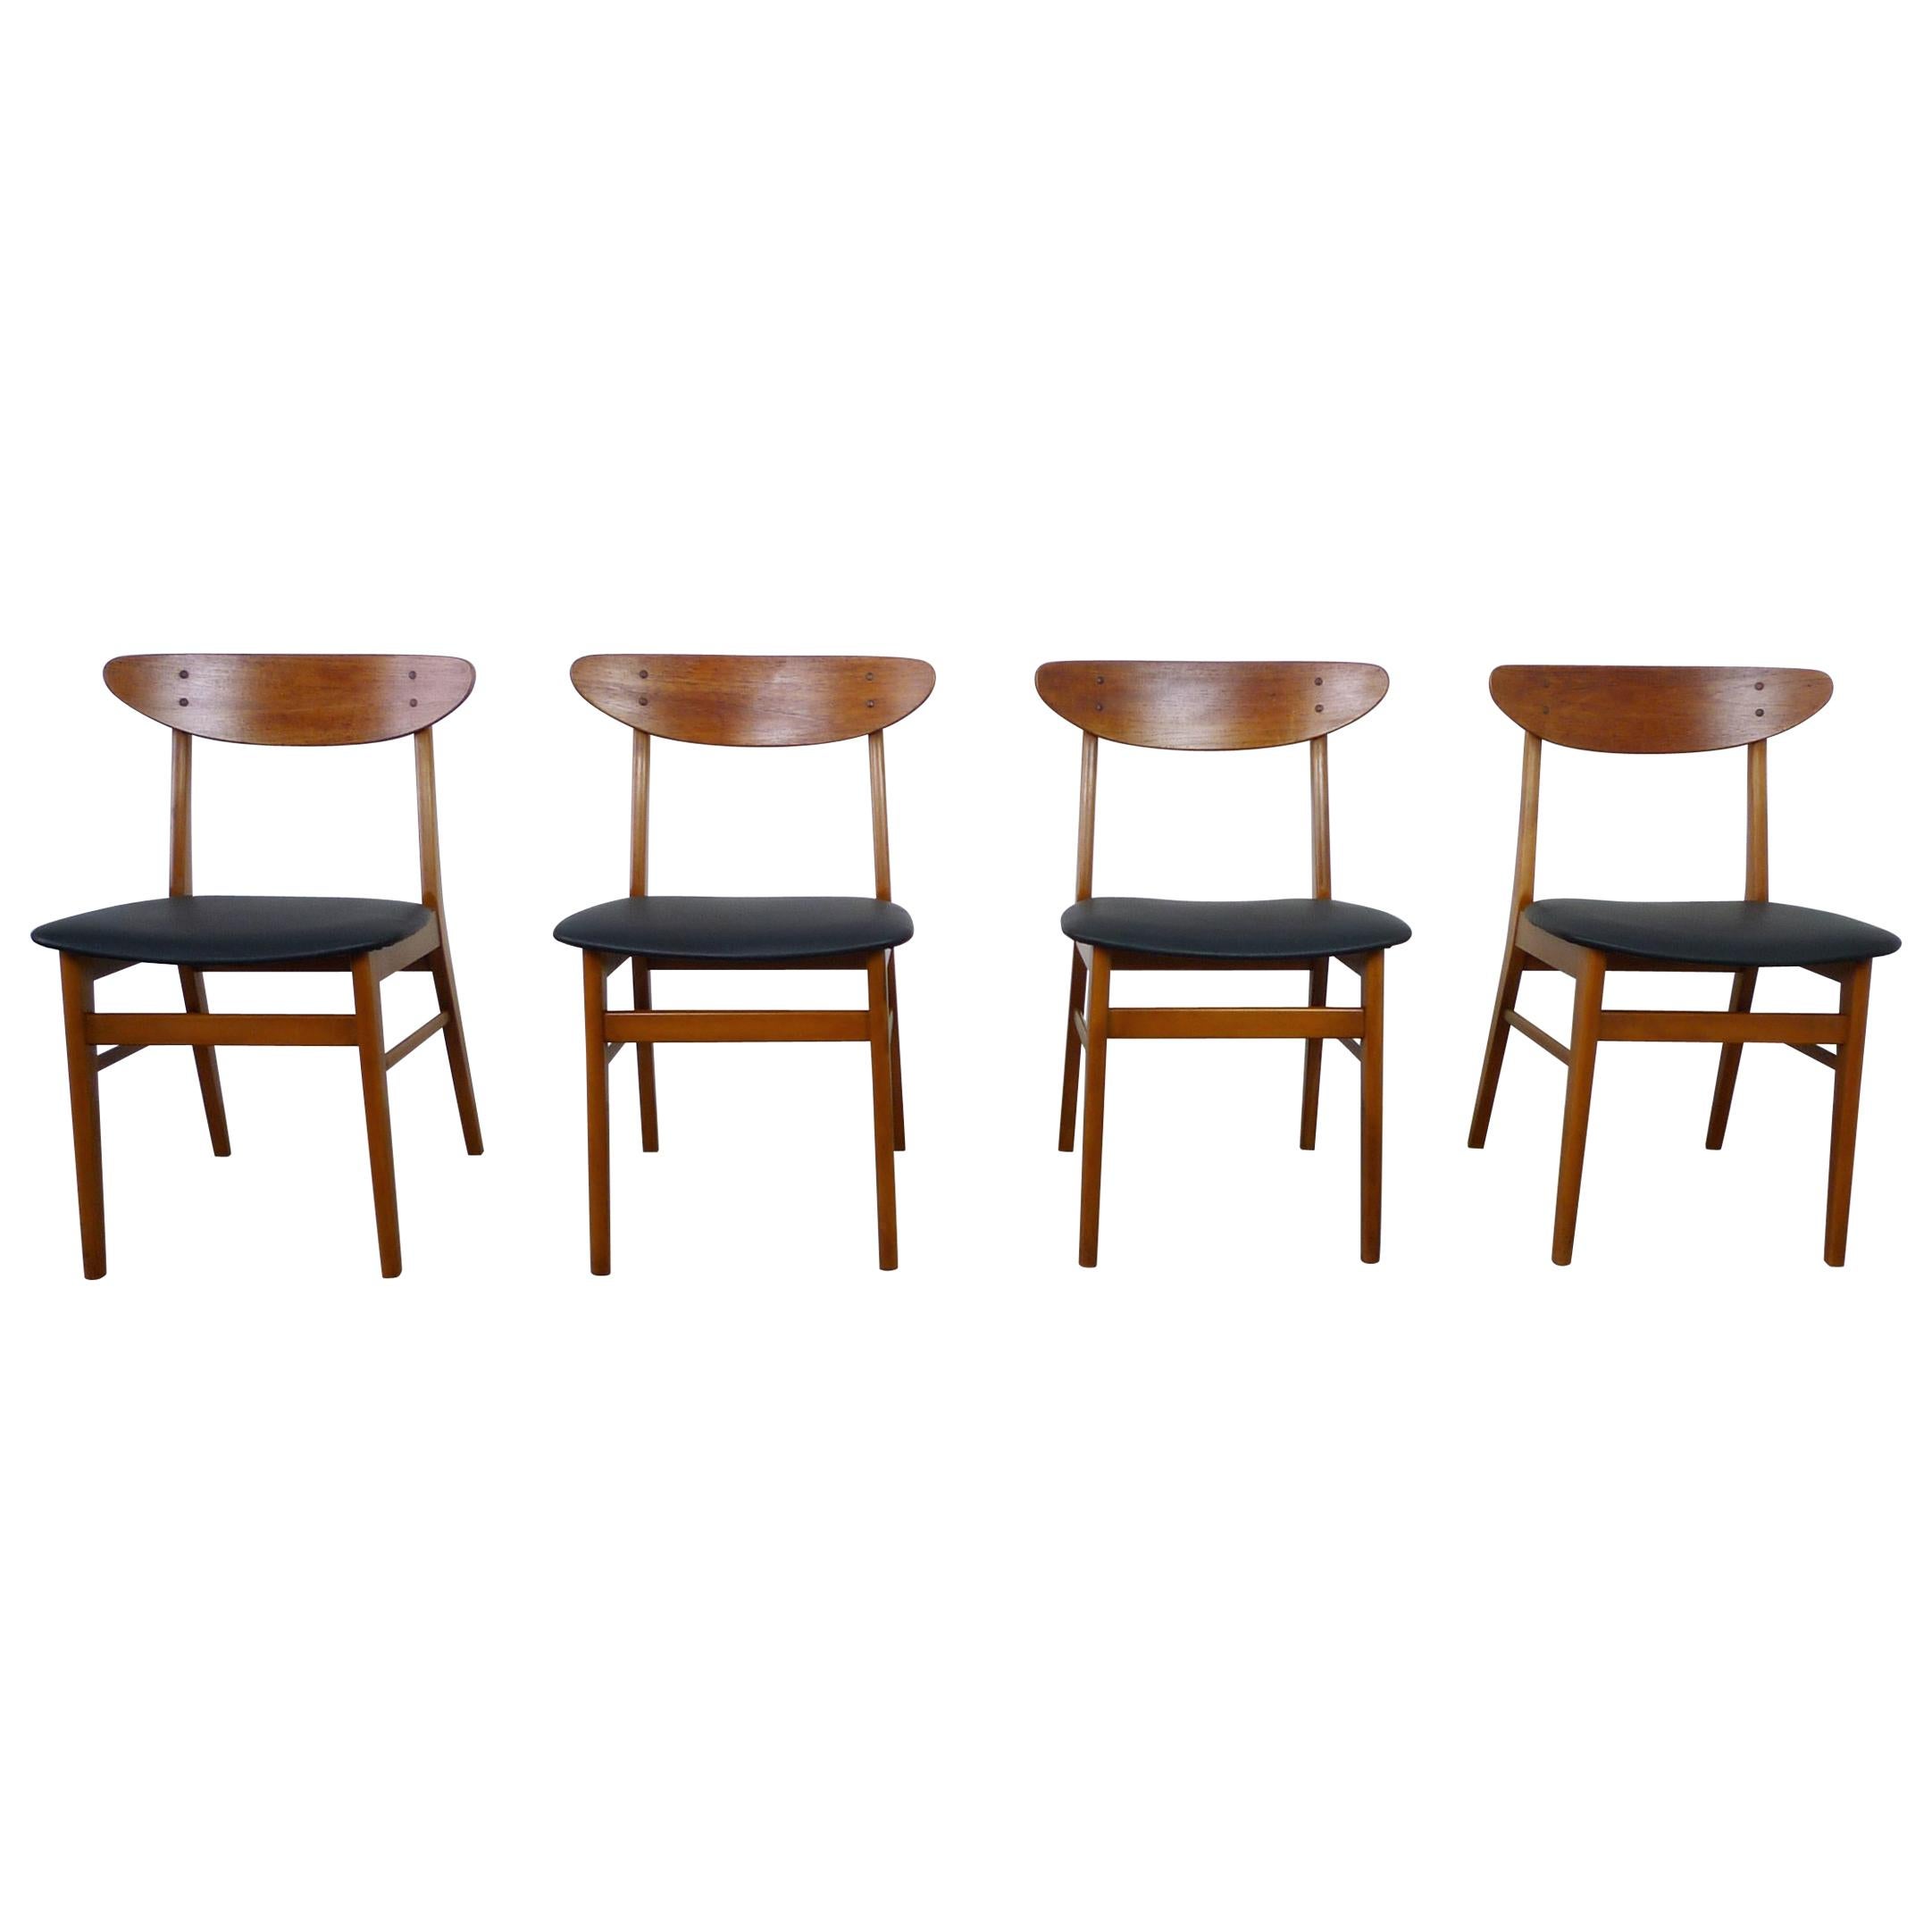 Set of Four Model 210 Dining Chairs from Farstrup Møbler, Denmark, 1960s For Sale